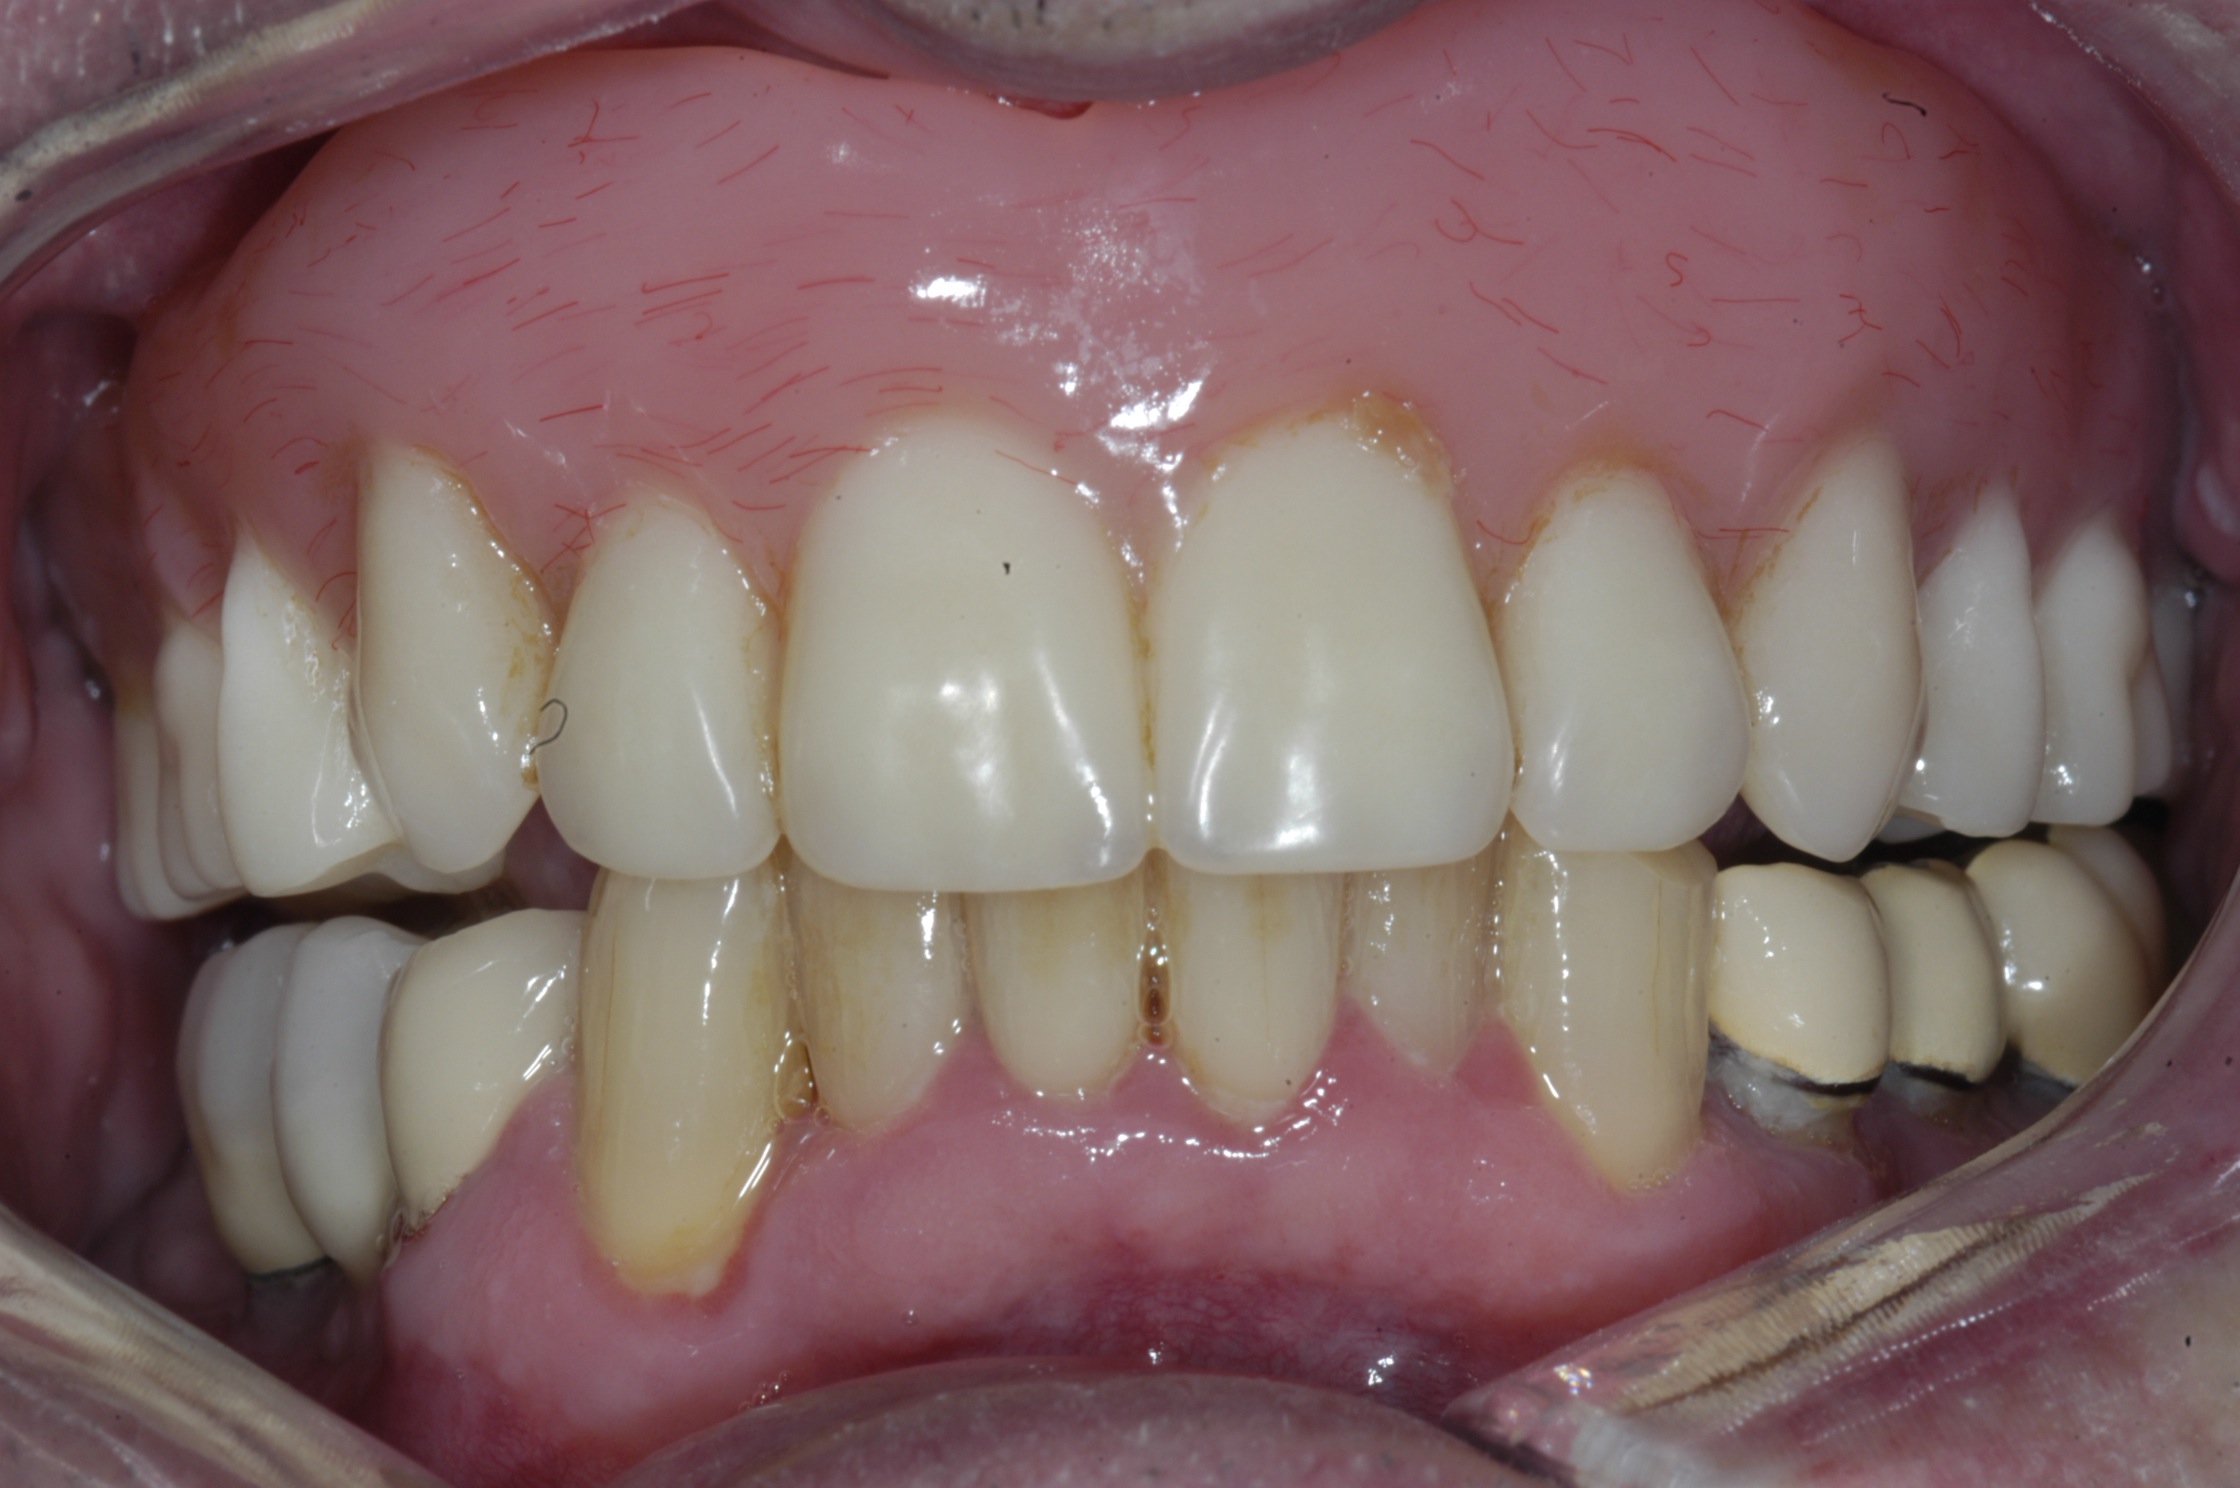 Overdenture is supported by four implants